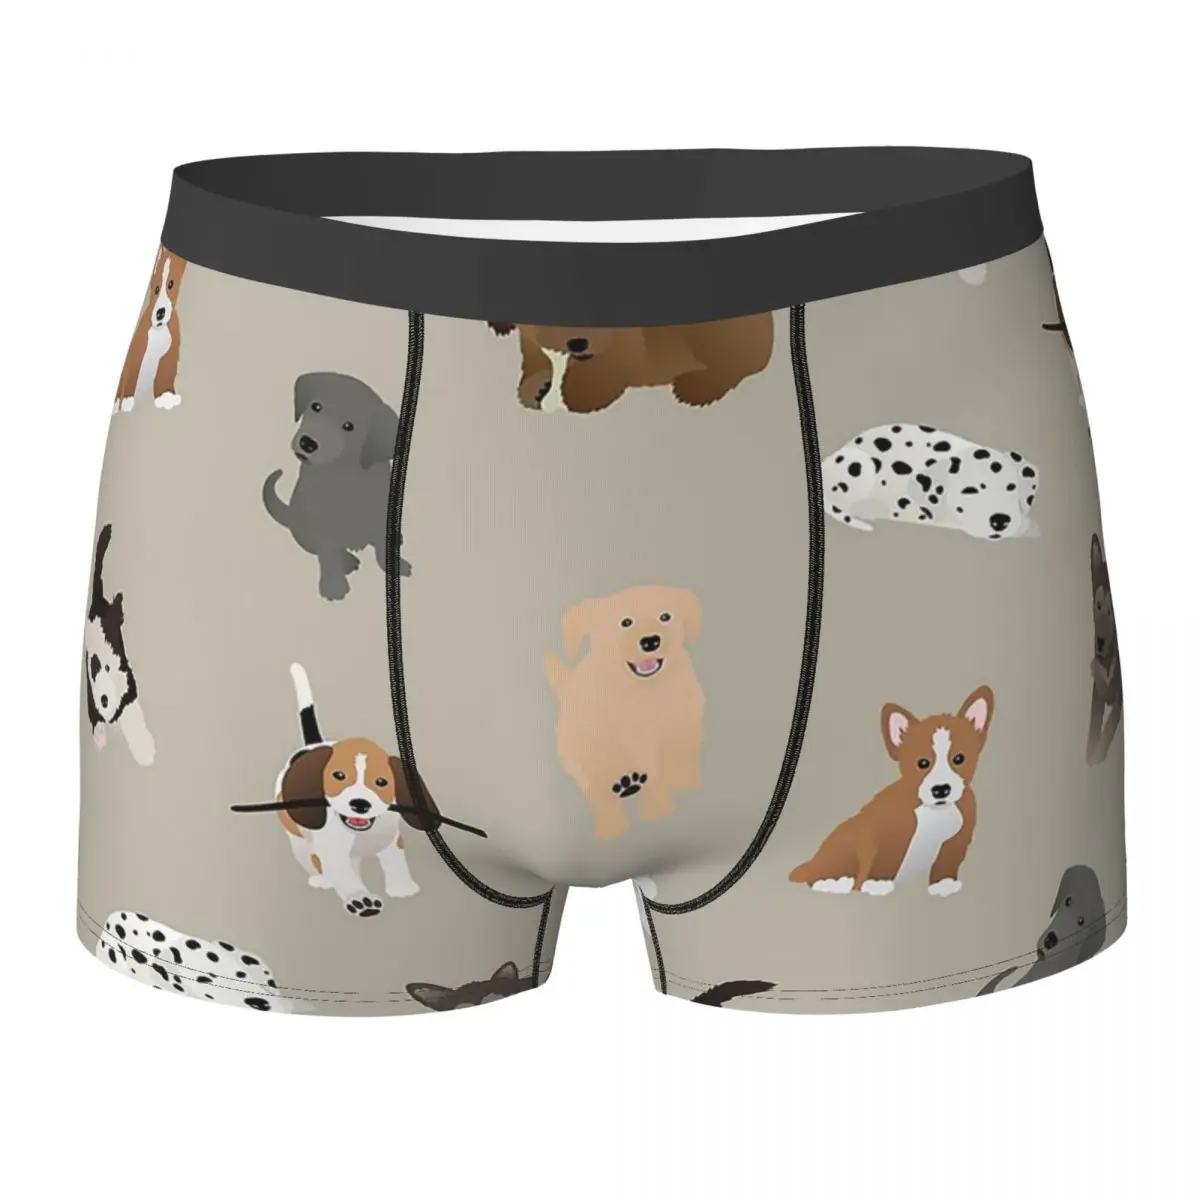 

Puppies More Pups Men's Underwear Dog Boxer Briefs Shorts Panties Fashion Polyester Underpants for Male S-XXL